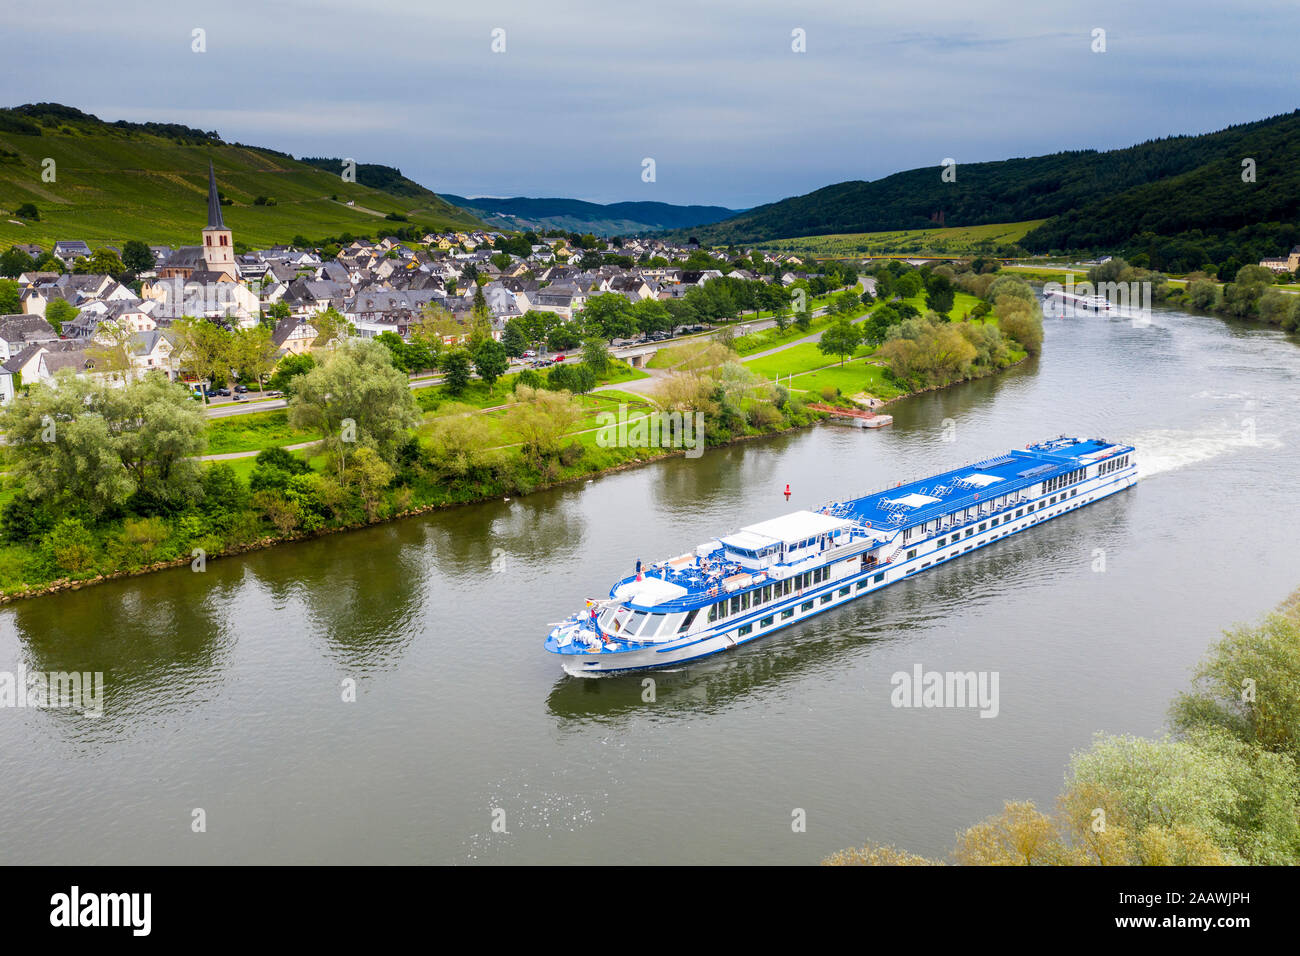 Aerial view of cruise ship on Mosel River, Bernkastel-kues, Germany Stock Photo